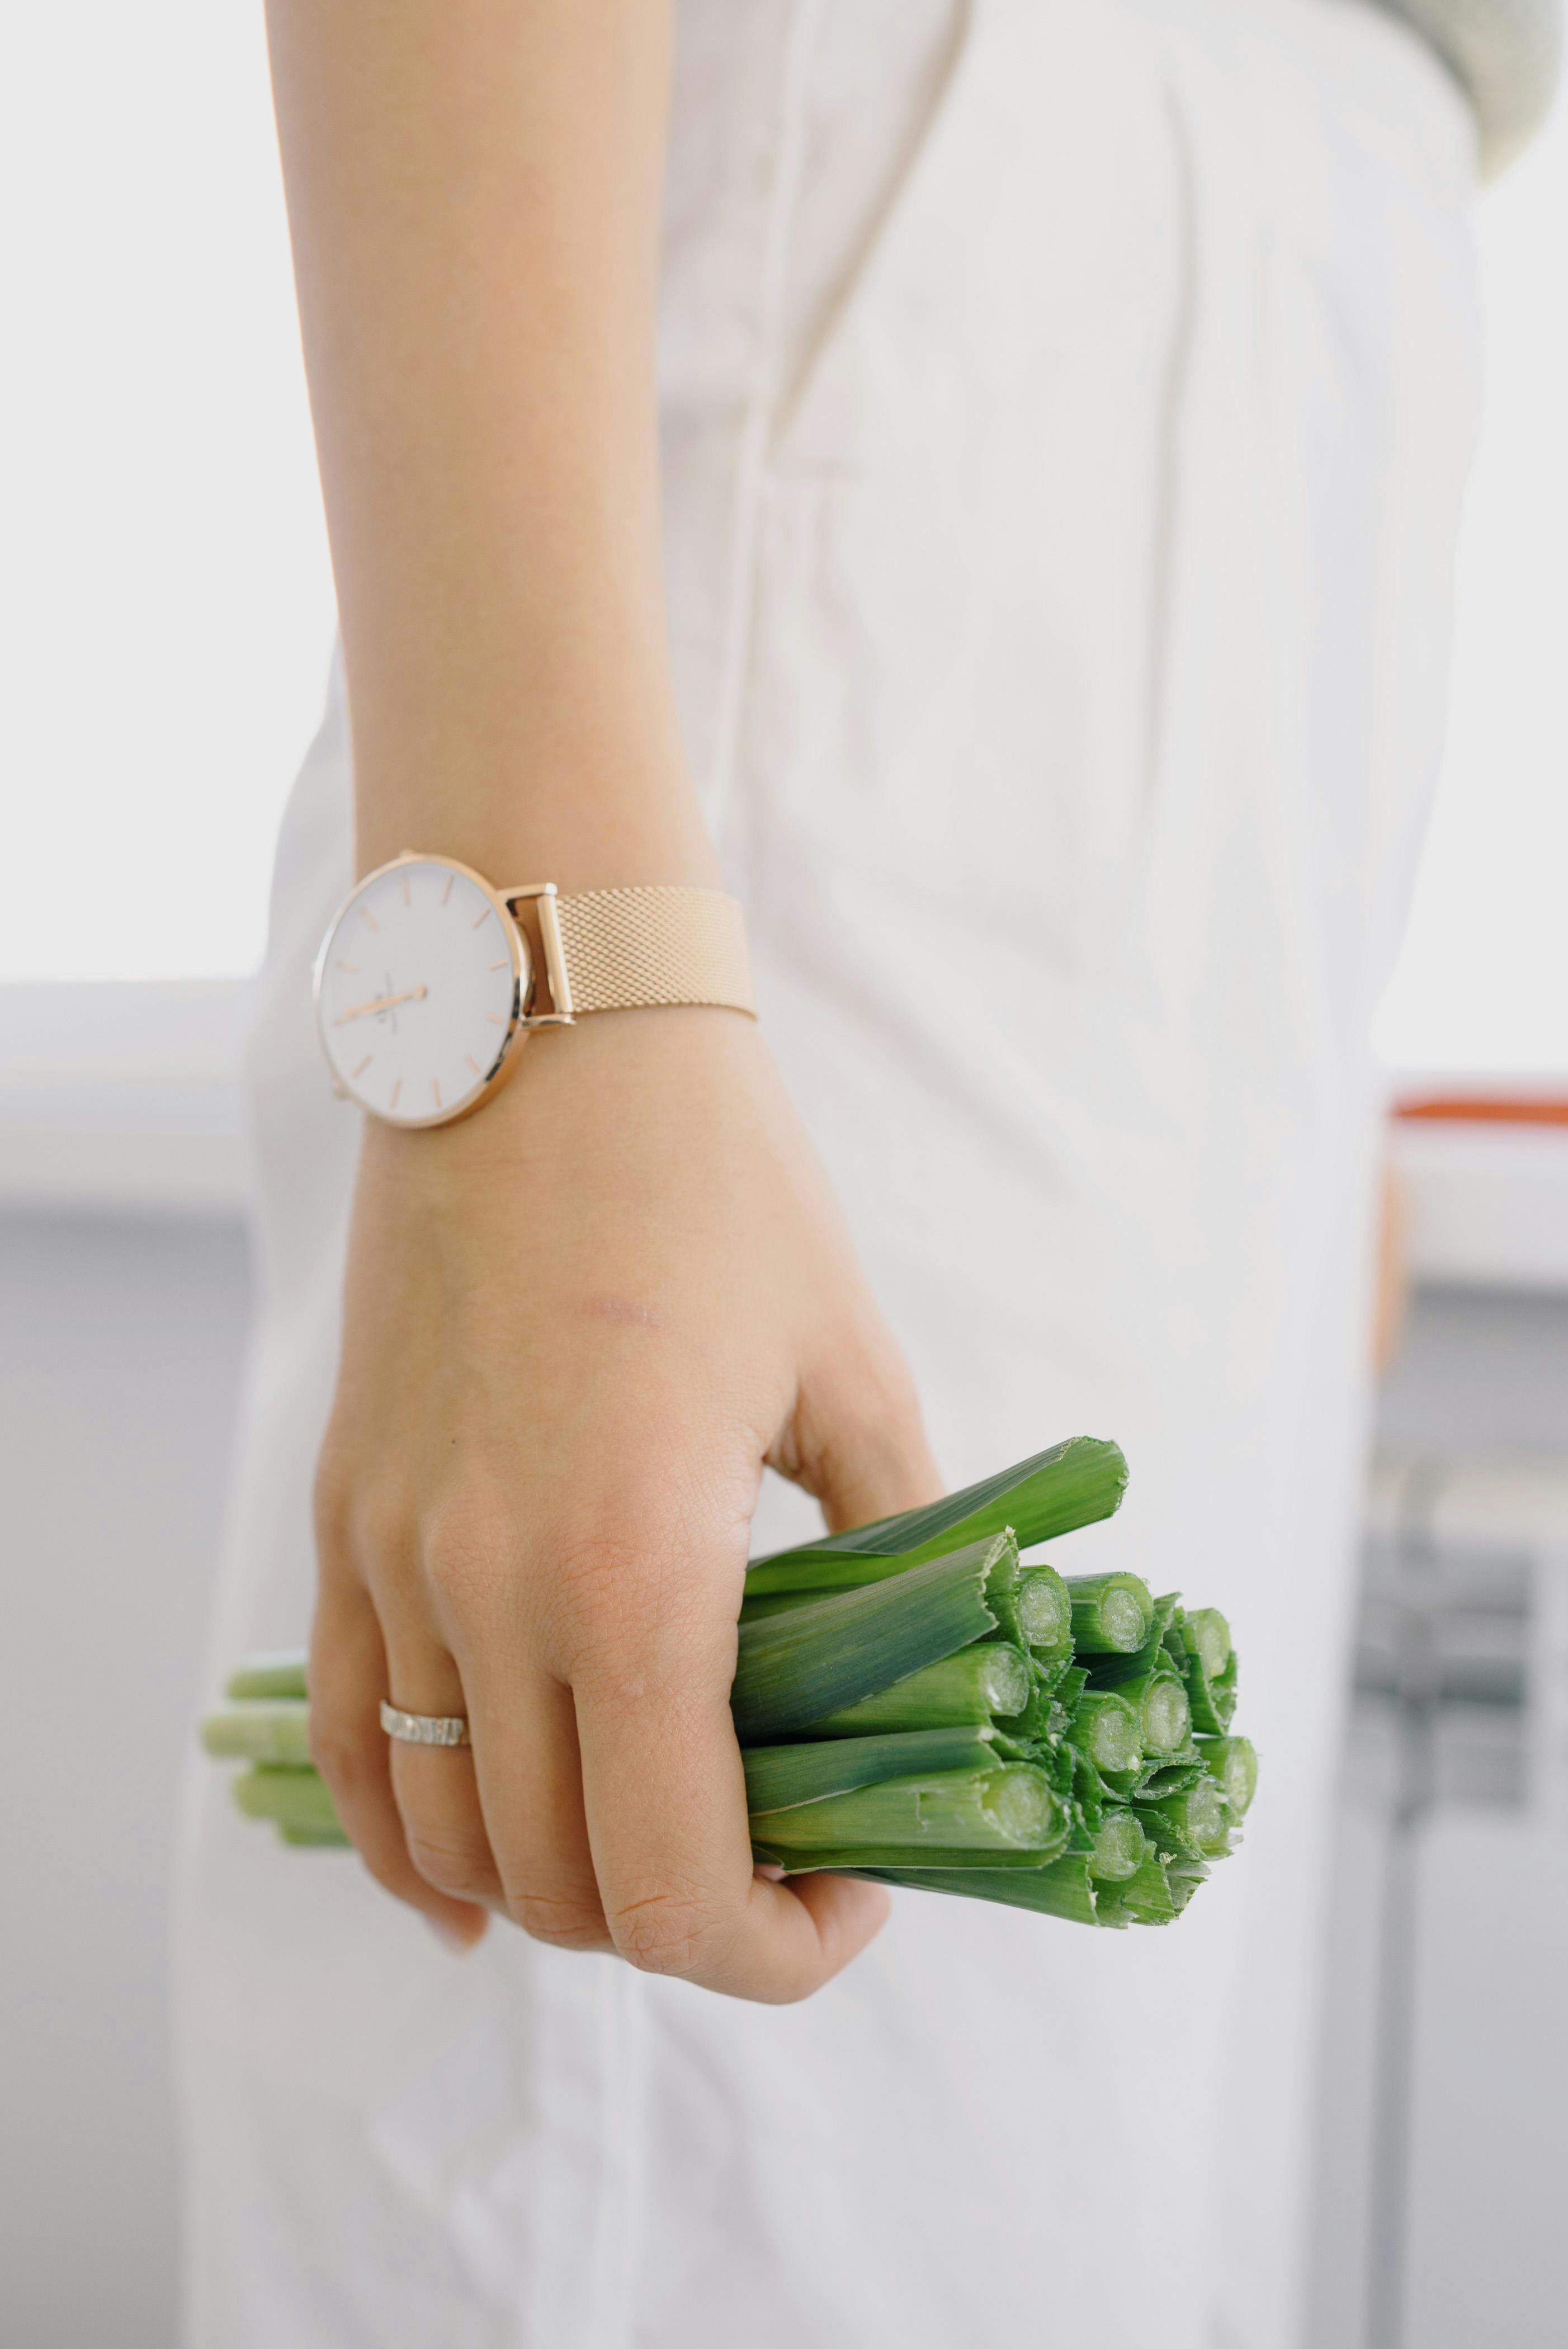 Jennifer takes stock of her remaining groceries, noticing the untouched celery | Source: Pexels.